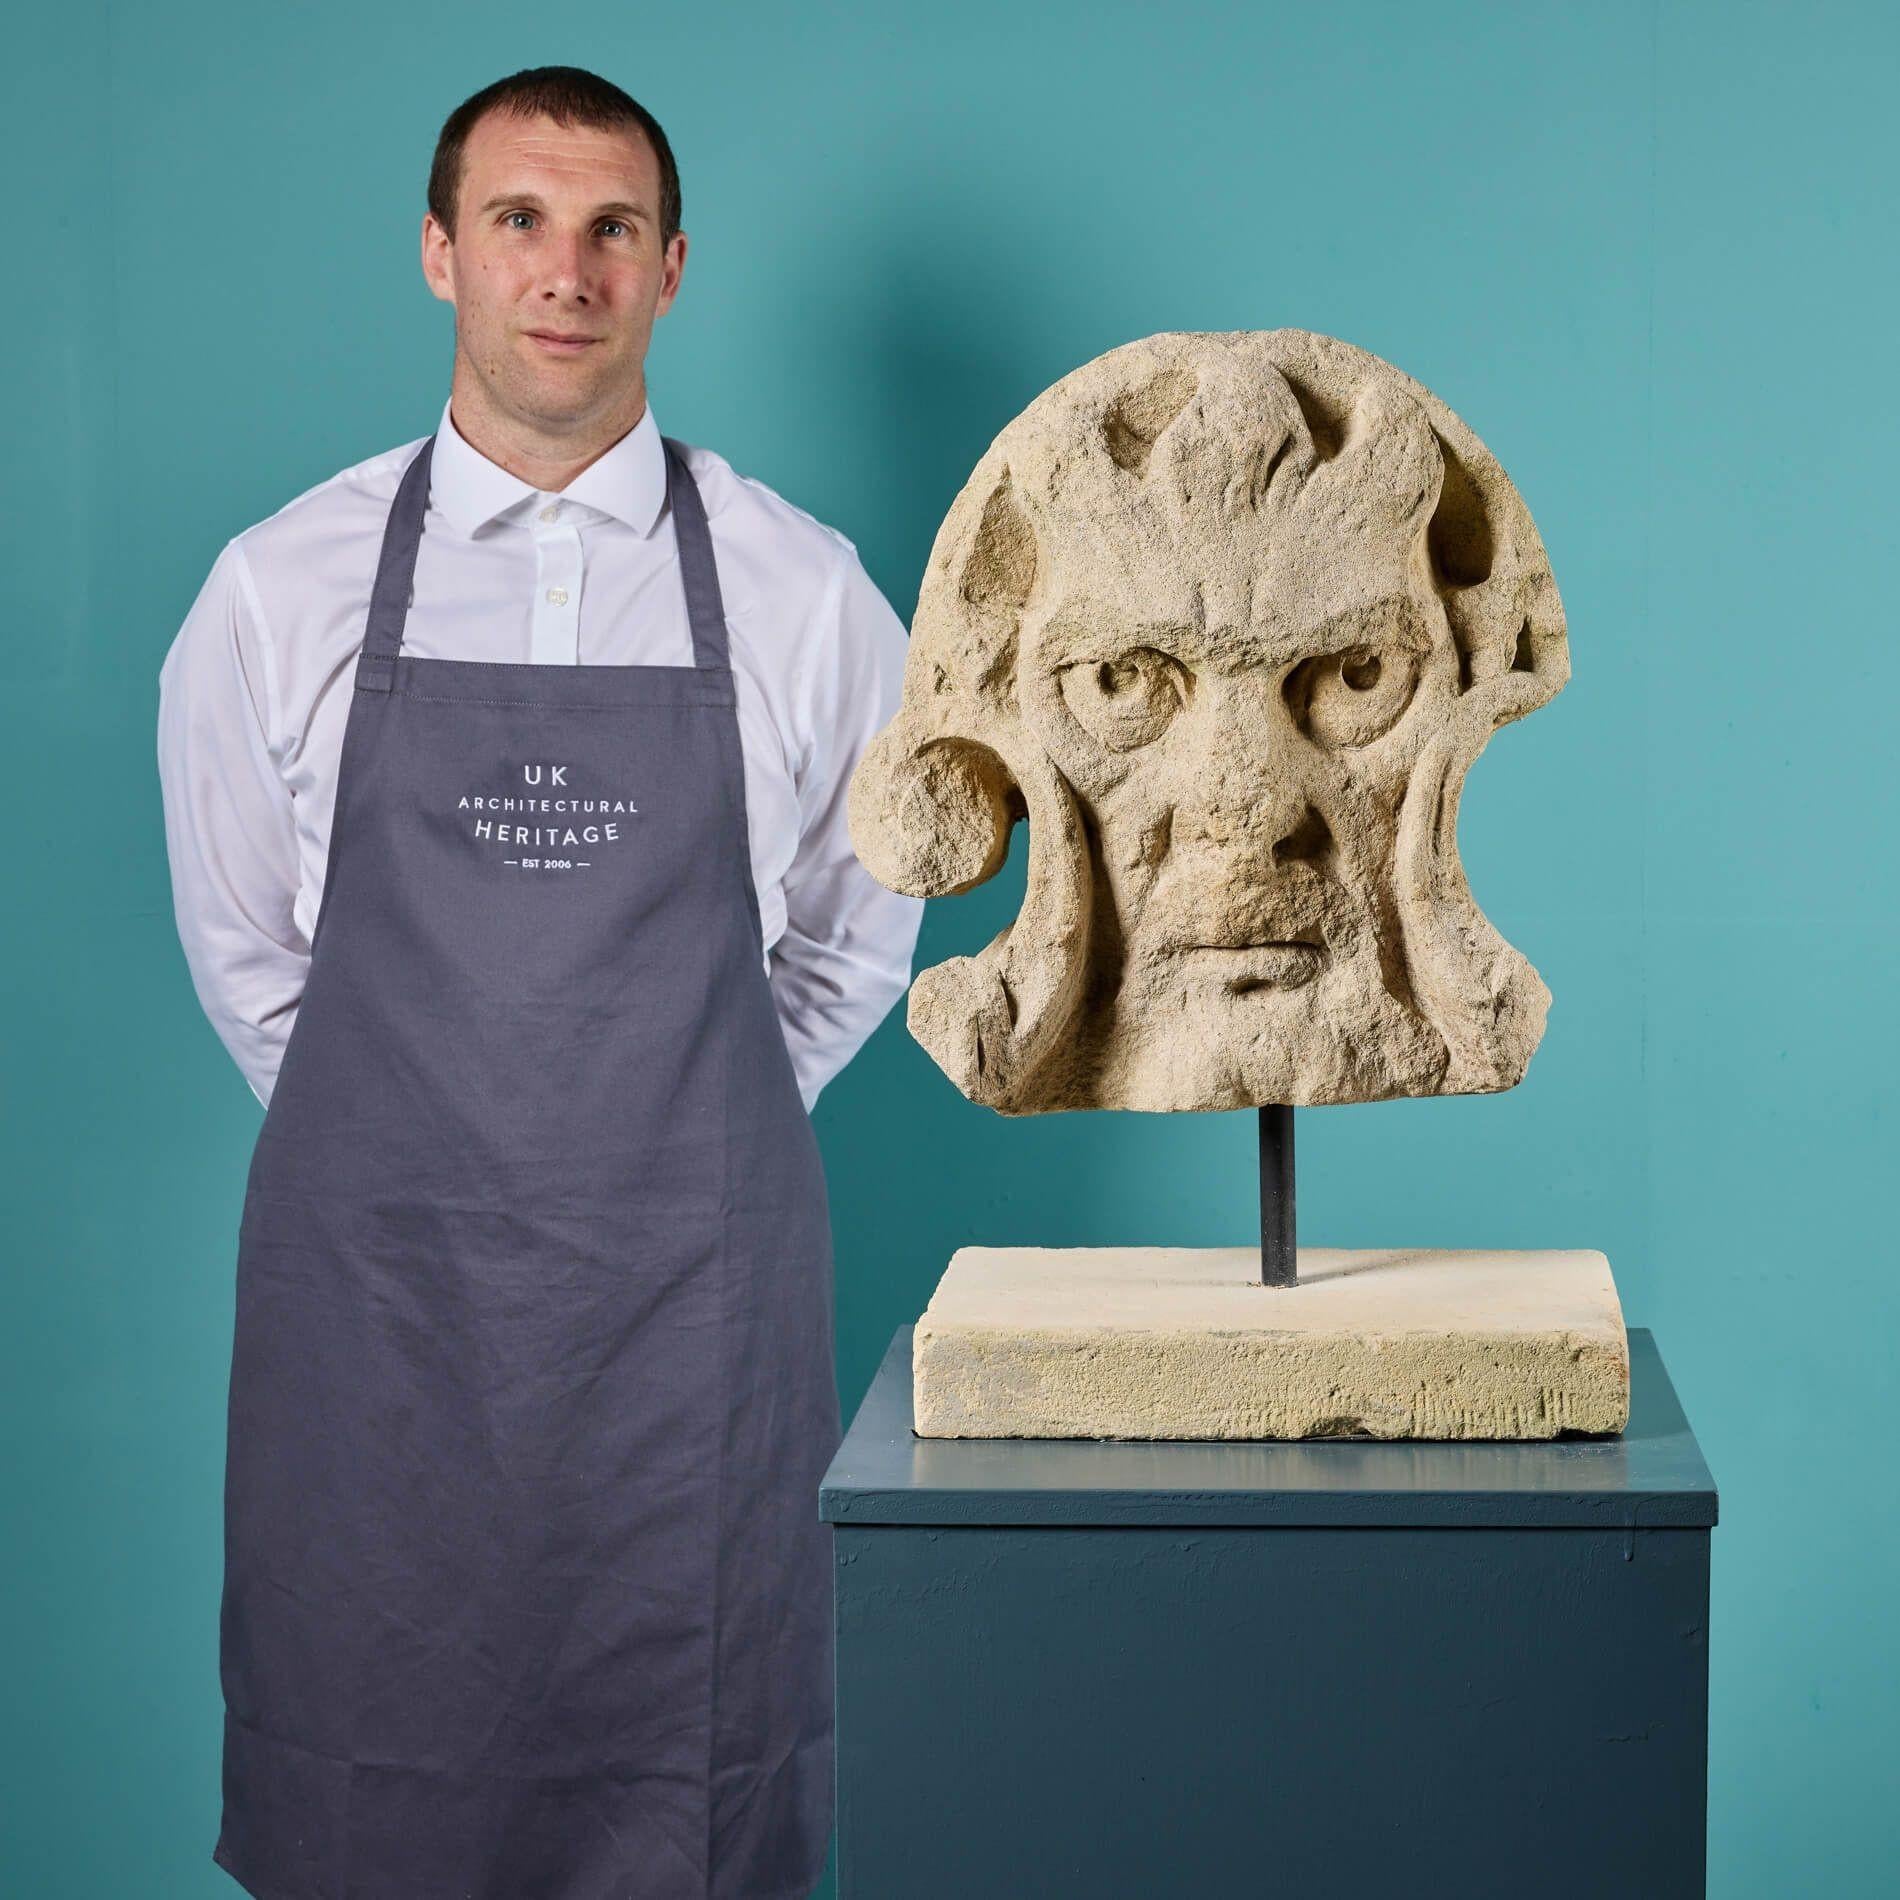 This engaging antique grotesque or demonic mask is quite the decorative piece. Hand carved into limestone, its details are superbly distinctive, the eyes appearing to follow you as you move around the room…

Portraying a hellfire or God-like